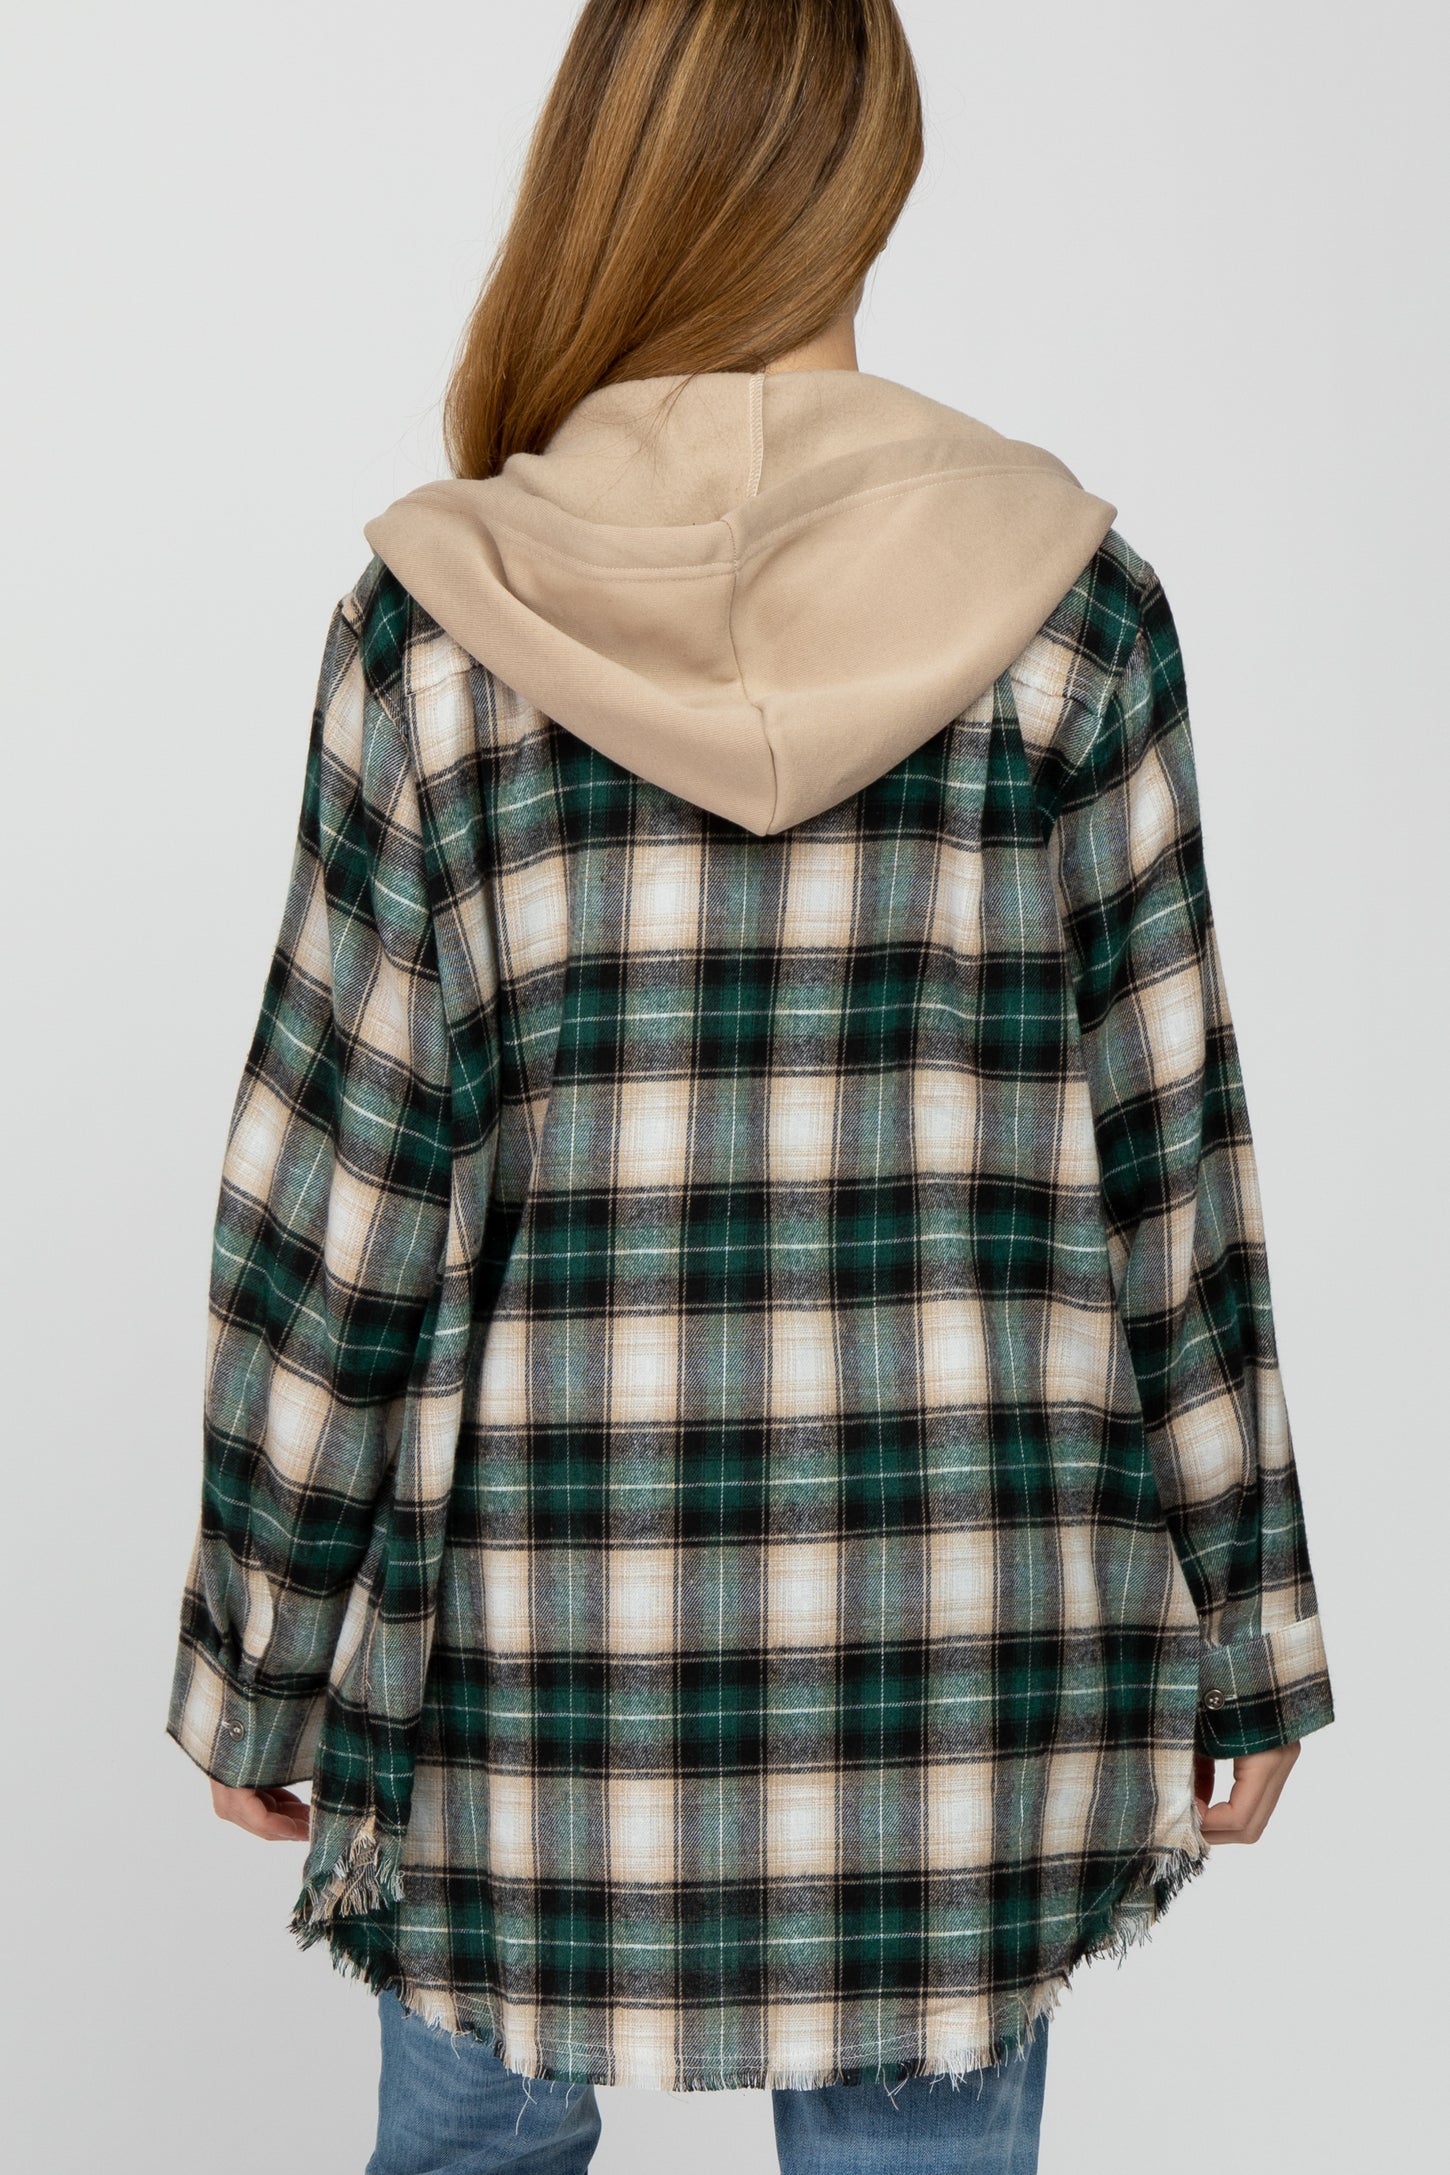 Green Plaid Button Front Fringe Hem Hooded Maternity Top